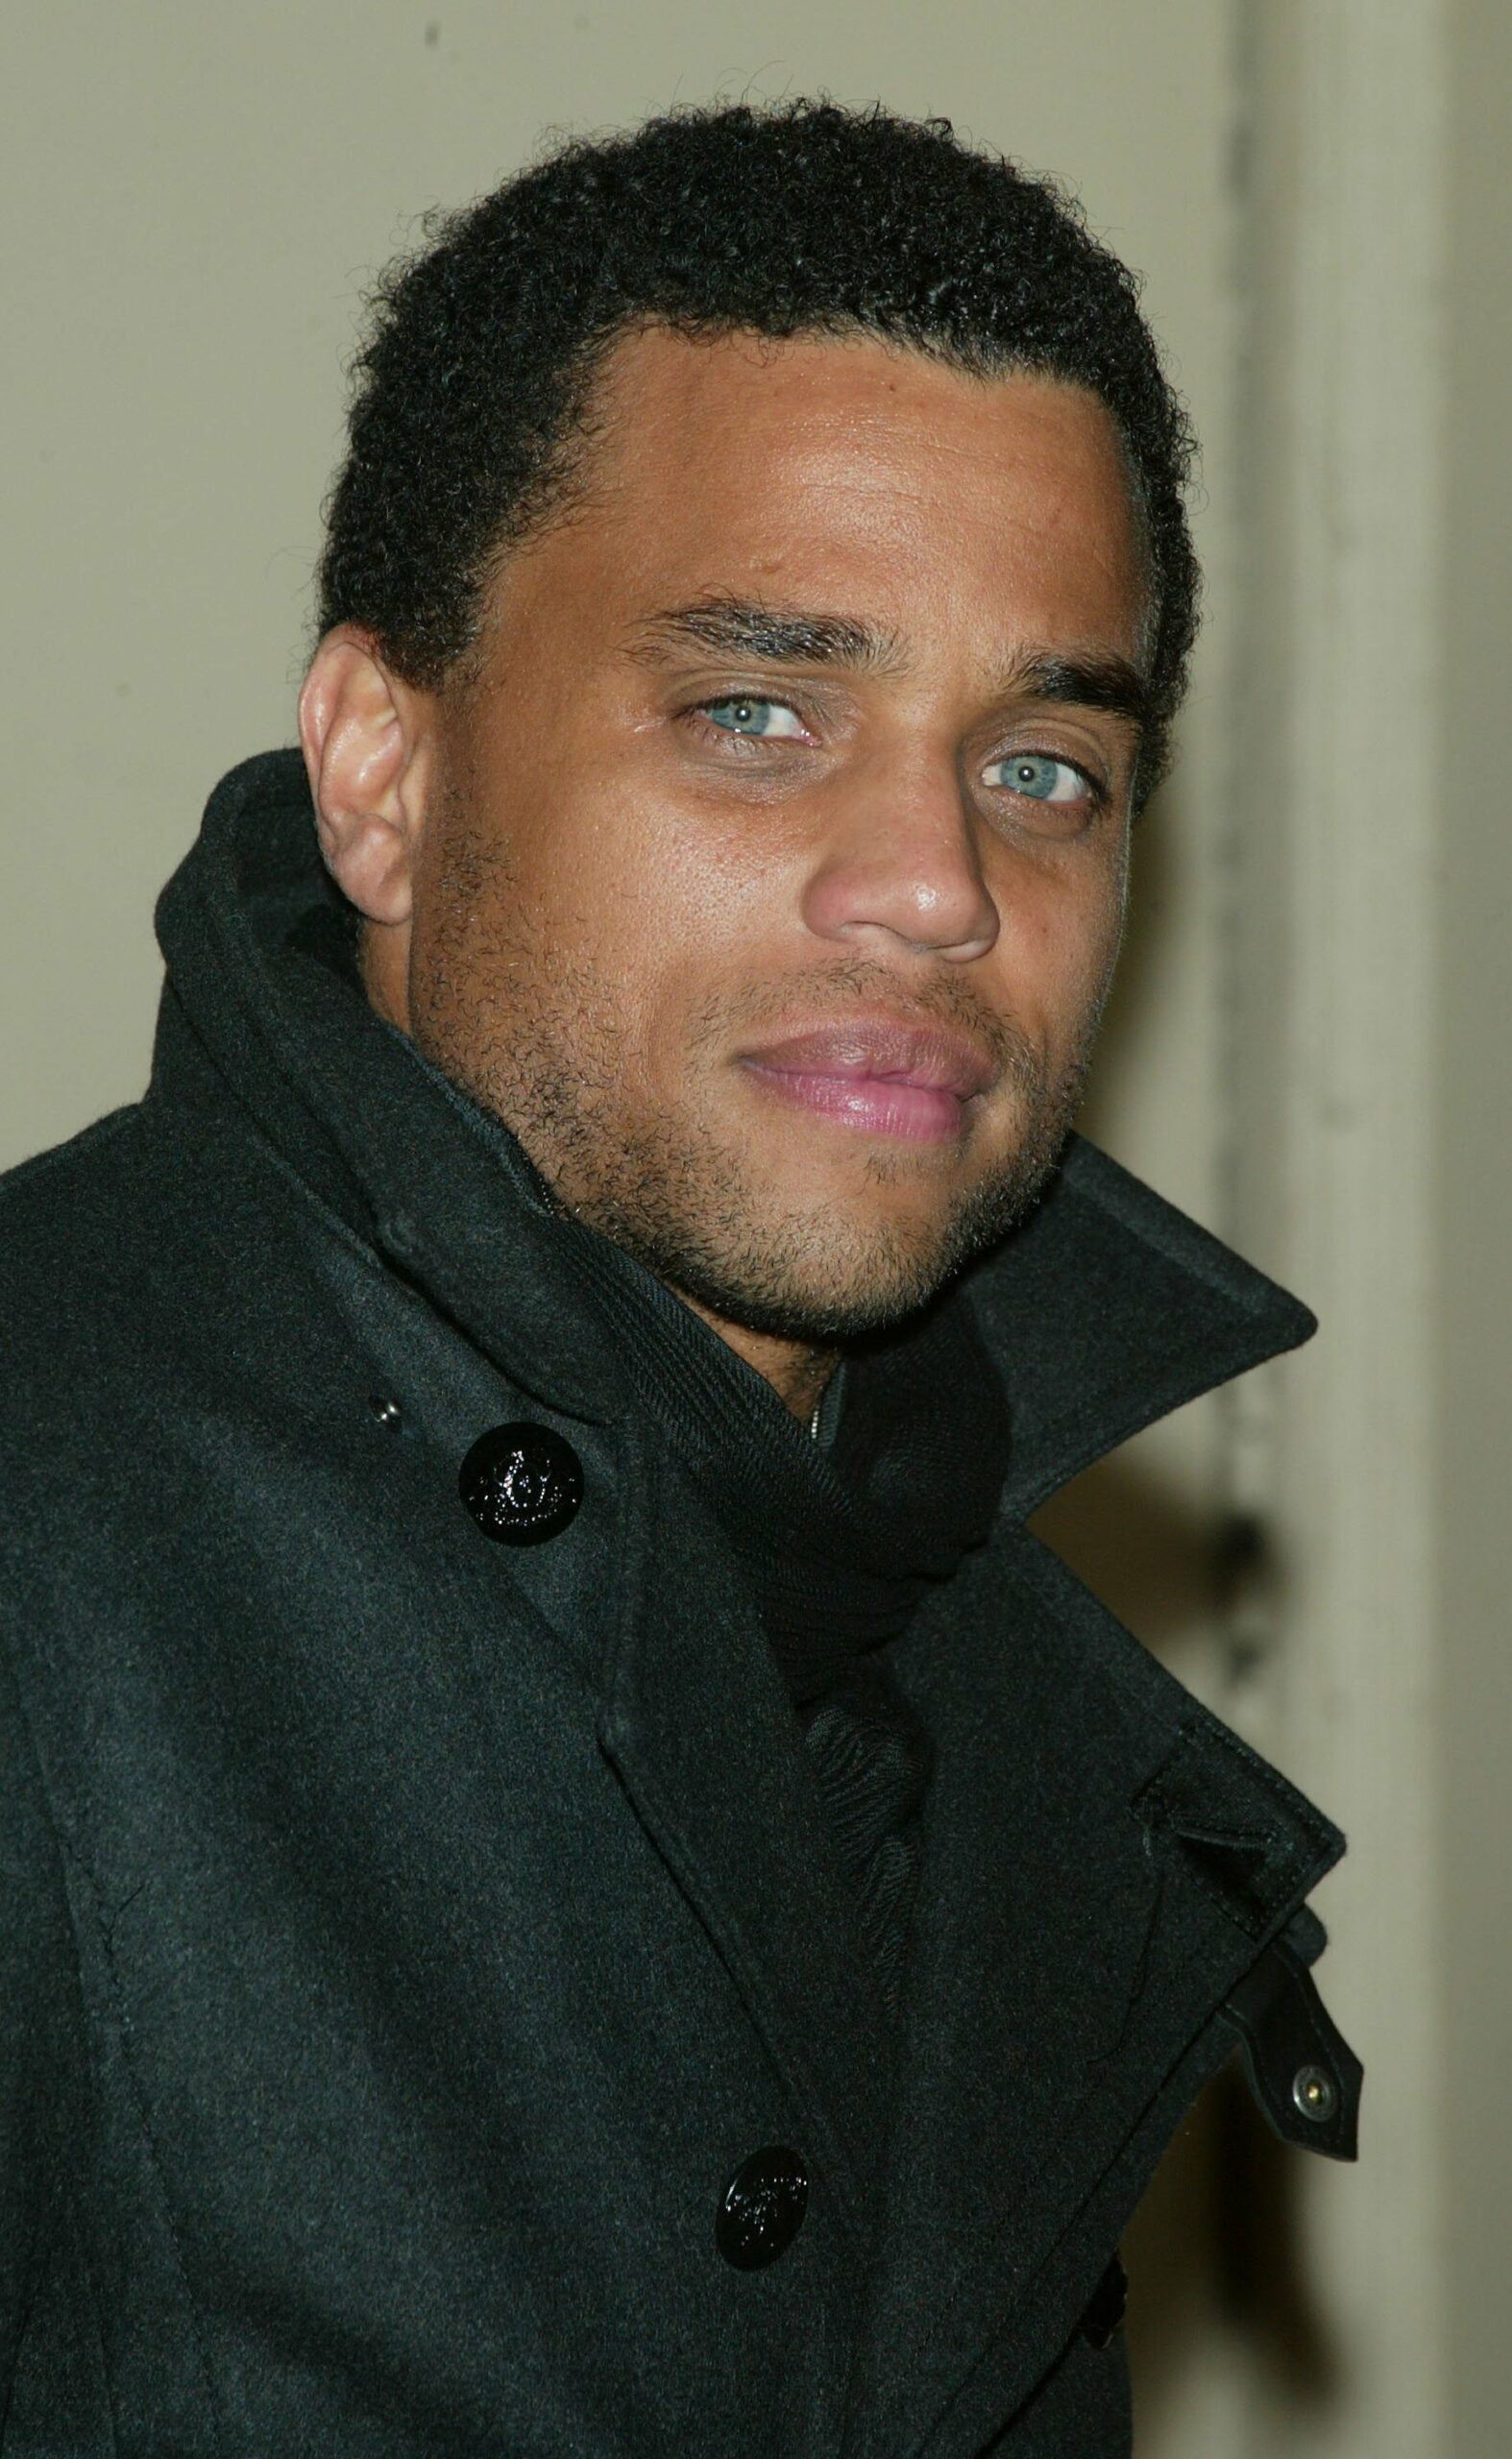 ASHLEY ♡ on X: black guy with blue eyes? mm michael ealy from